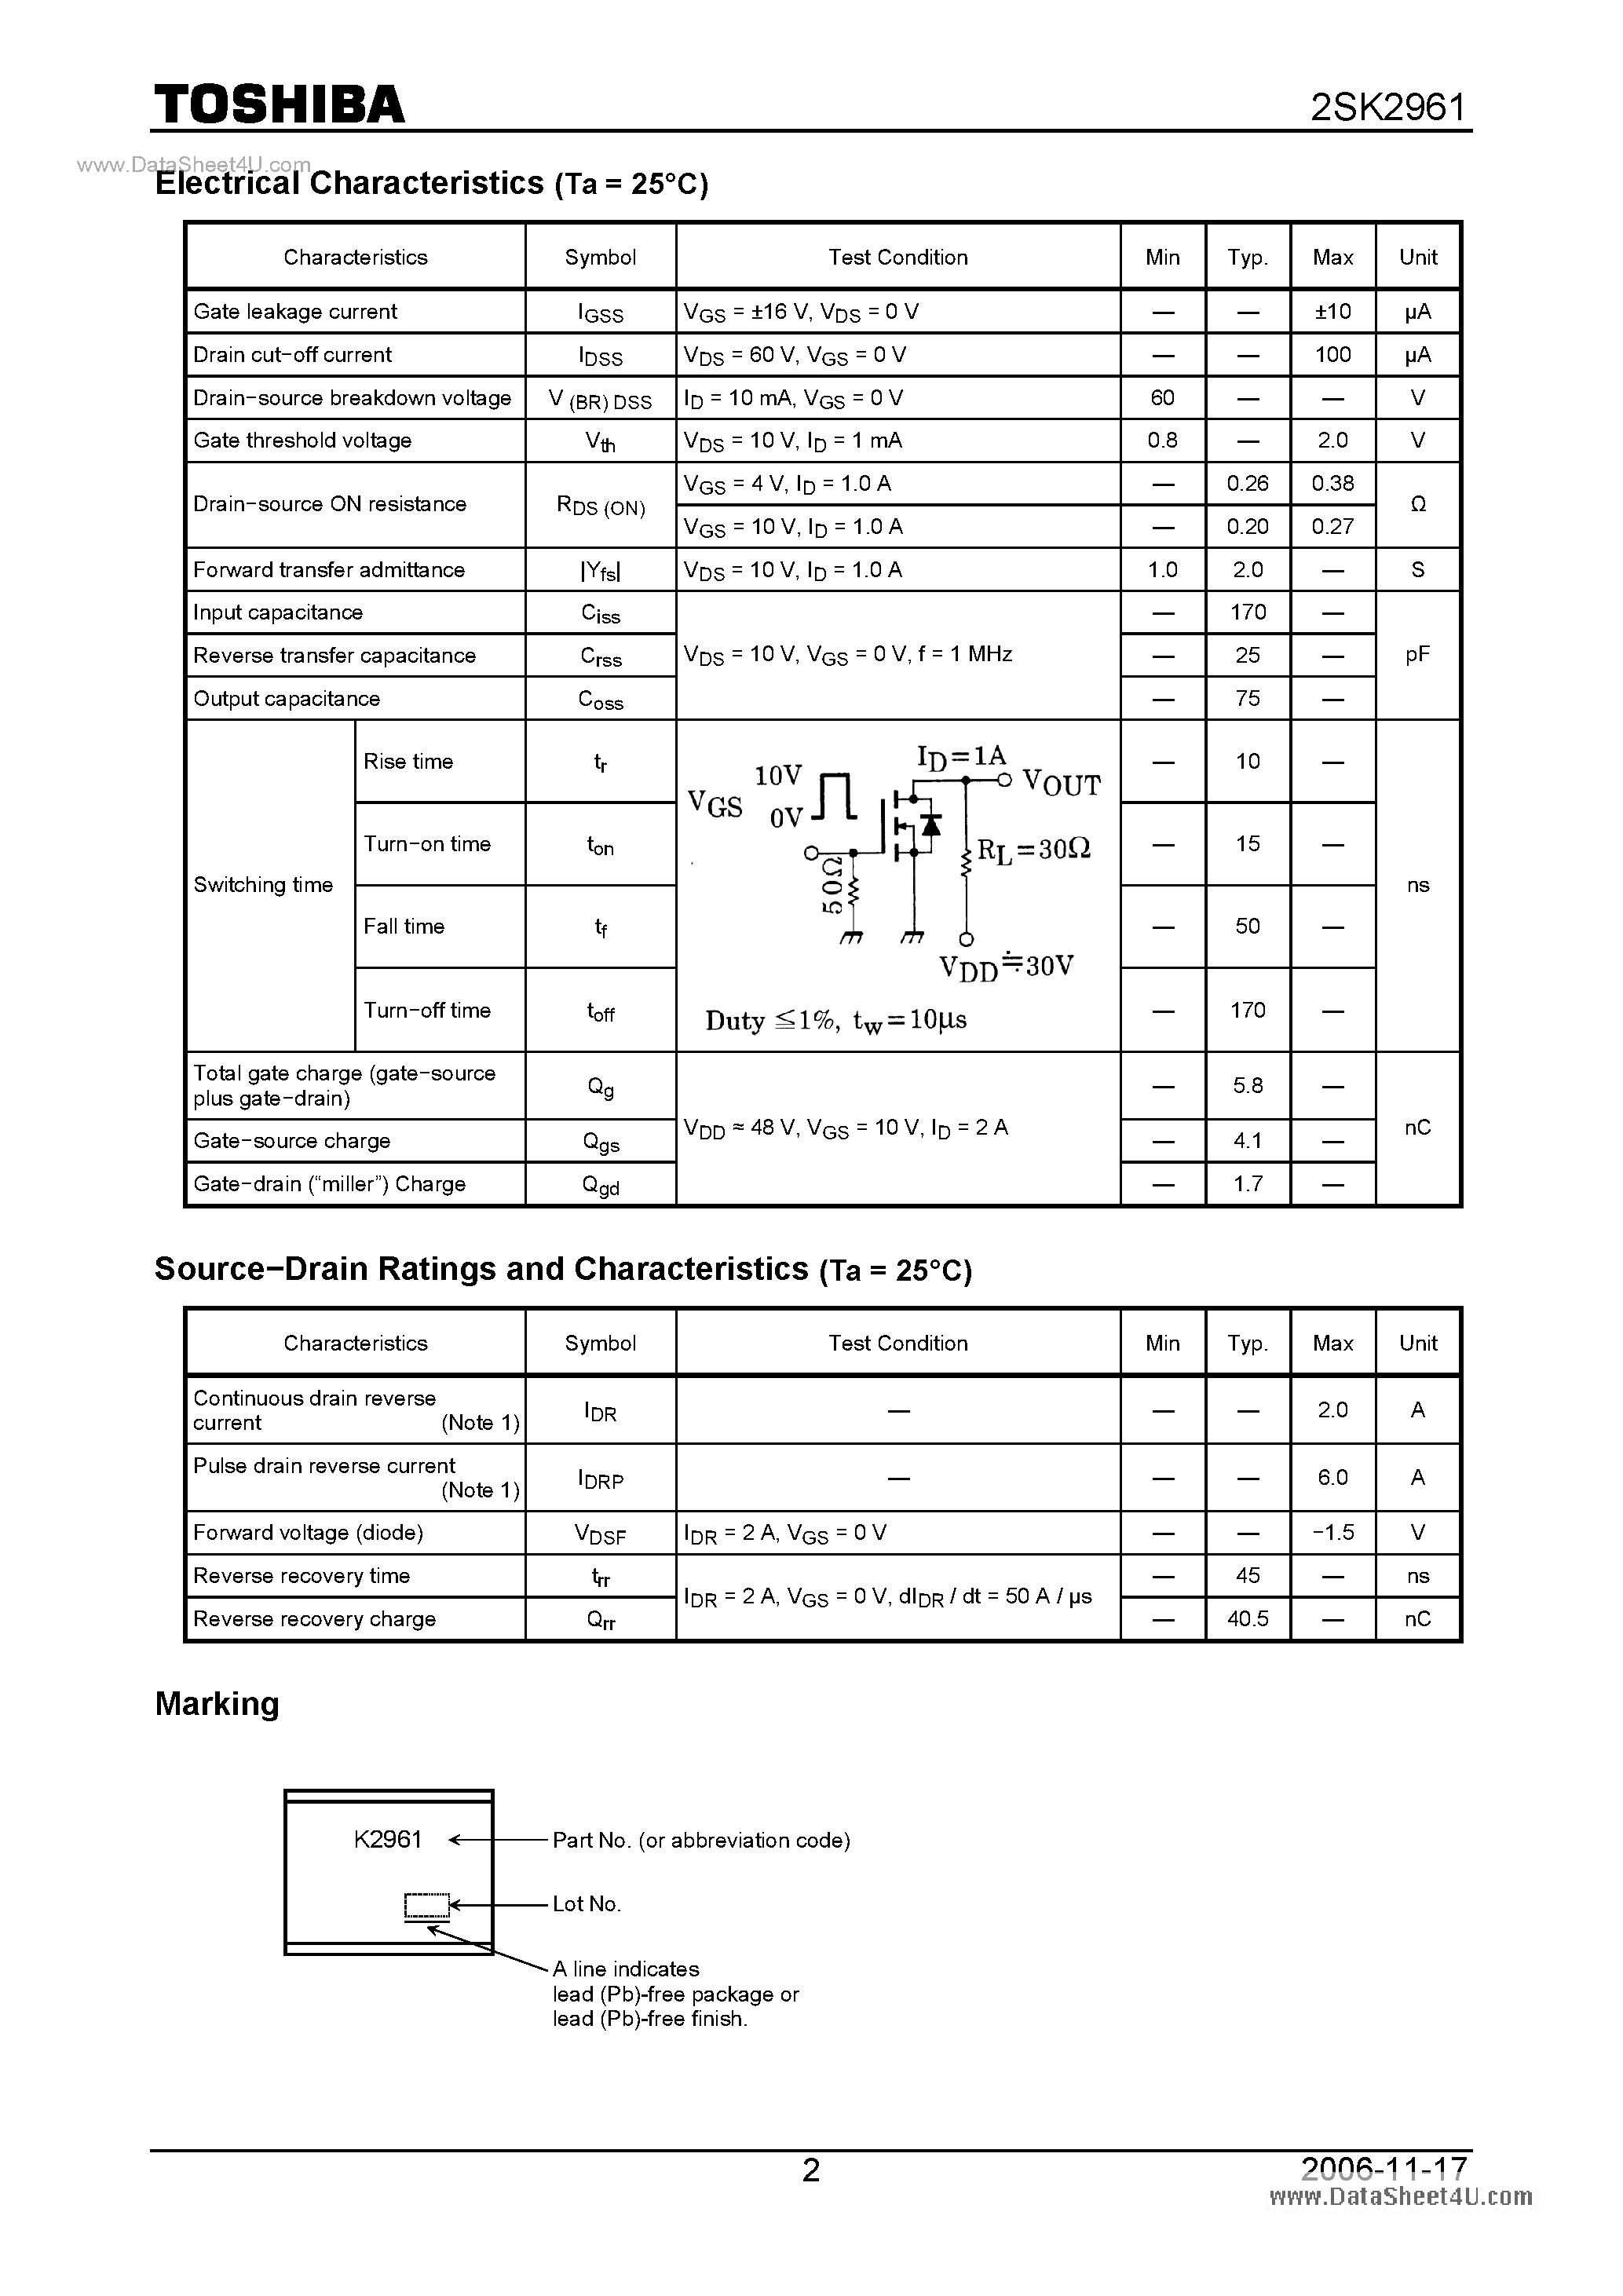 Datasheet K2961 - Search -----> 2SK2961 page 2